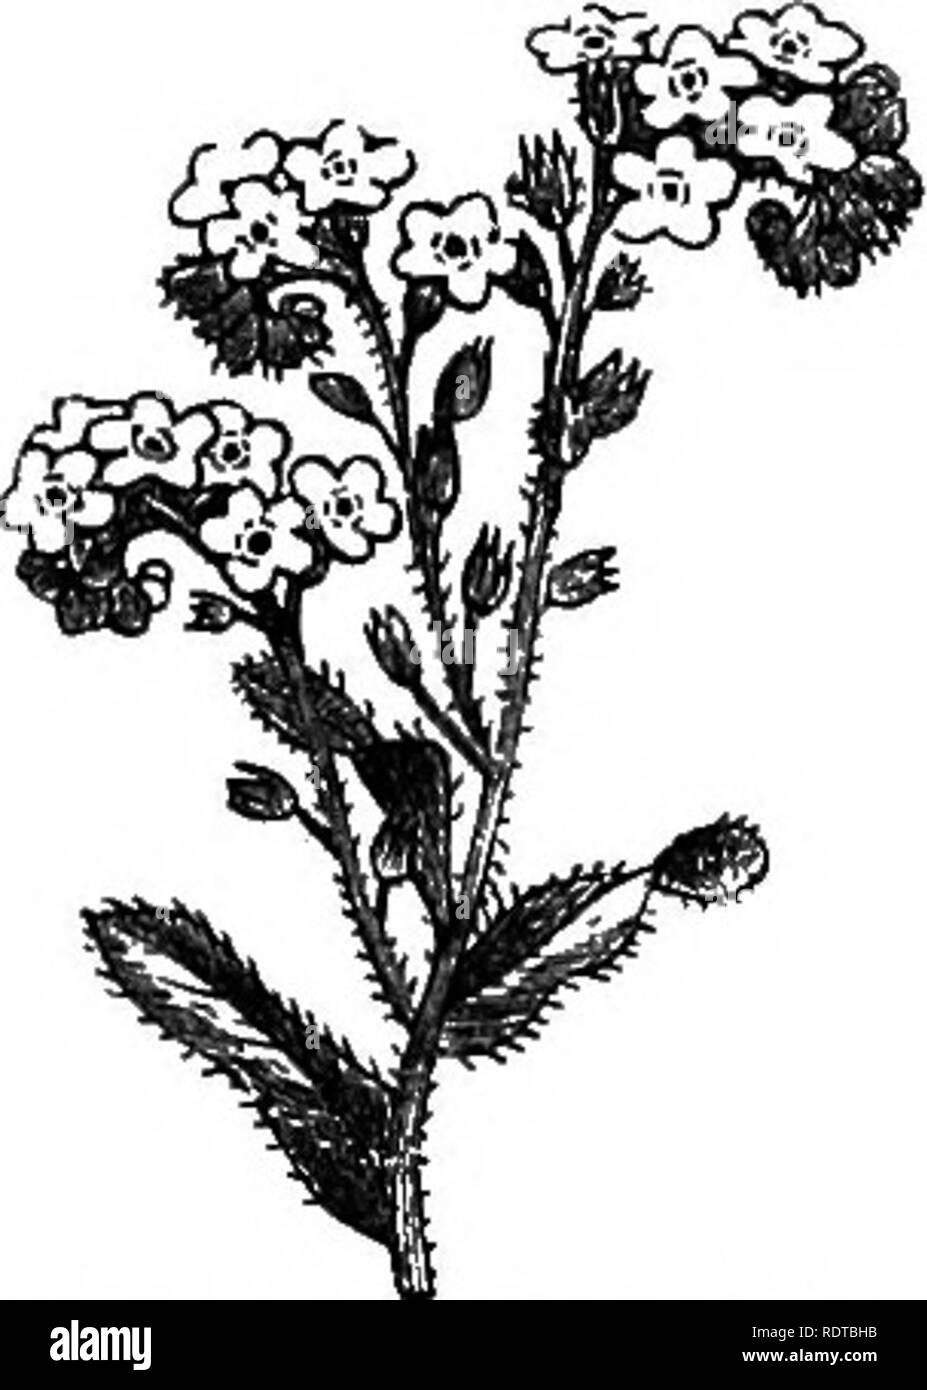 . My garden, its plan and culture together with a general description of its geology, botany, and natural history. Gardening. Fig. 693.—Myosotis dissitiflora. Fig. 694.—M. rupicola. Fig. 695. —Veronica maritima. We grow many Speedwells (Veronica). The lovely V. Ckamczdrys grows wild with us. The V. maritima (fig. 695) is an elegant plant, and lasts in blossom a long time. V repens (fig. 696) is well adapted for the rock-work. We grow also V. aphylla, V. amcena, V. Candida, V. nummularia, V. saxatilis, V. spicata, V. Teucriiim, V. rupestre, V. virginica, and other species.. Please note that the Stock Photo